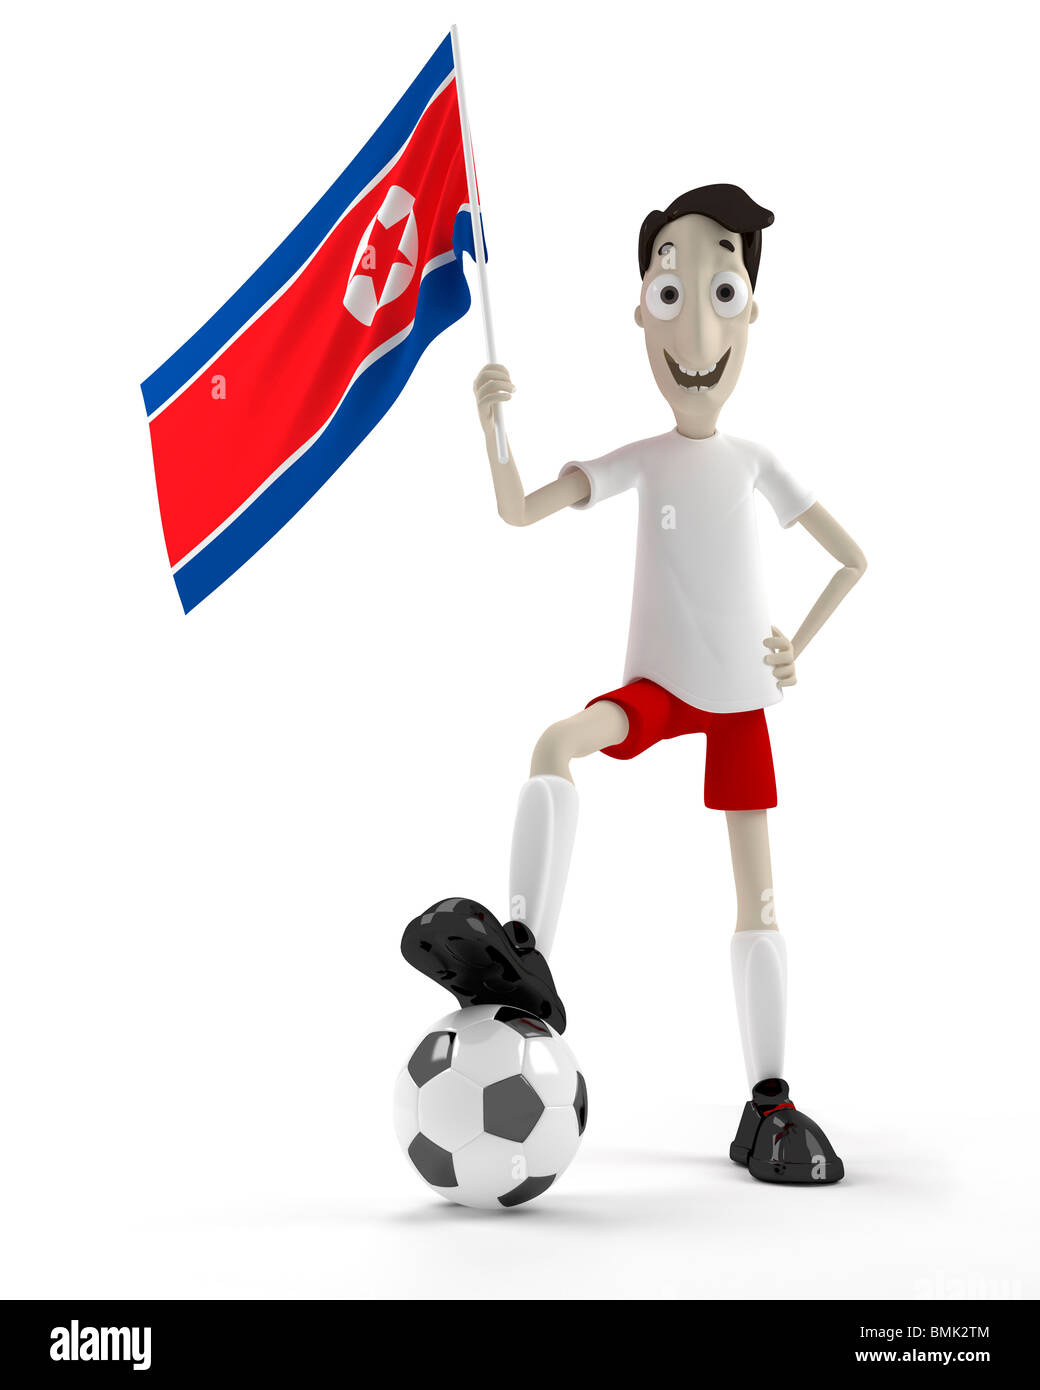 Smiling cartoon style soccer player with ball and North Korea flag Stock Photo